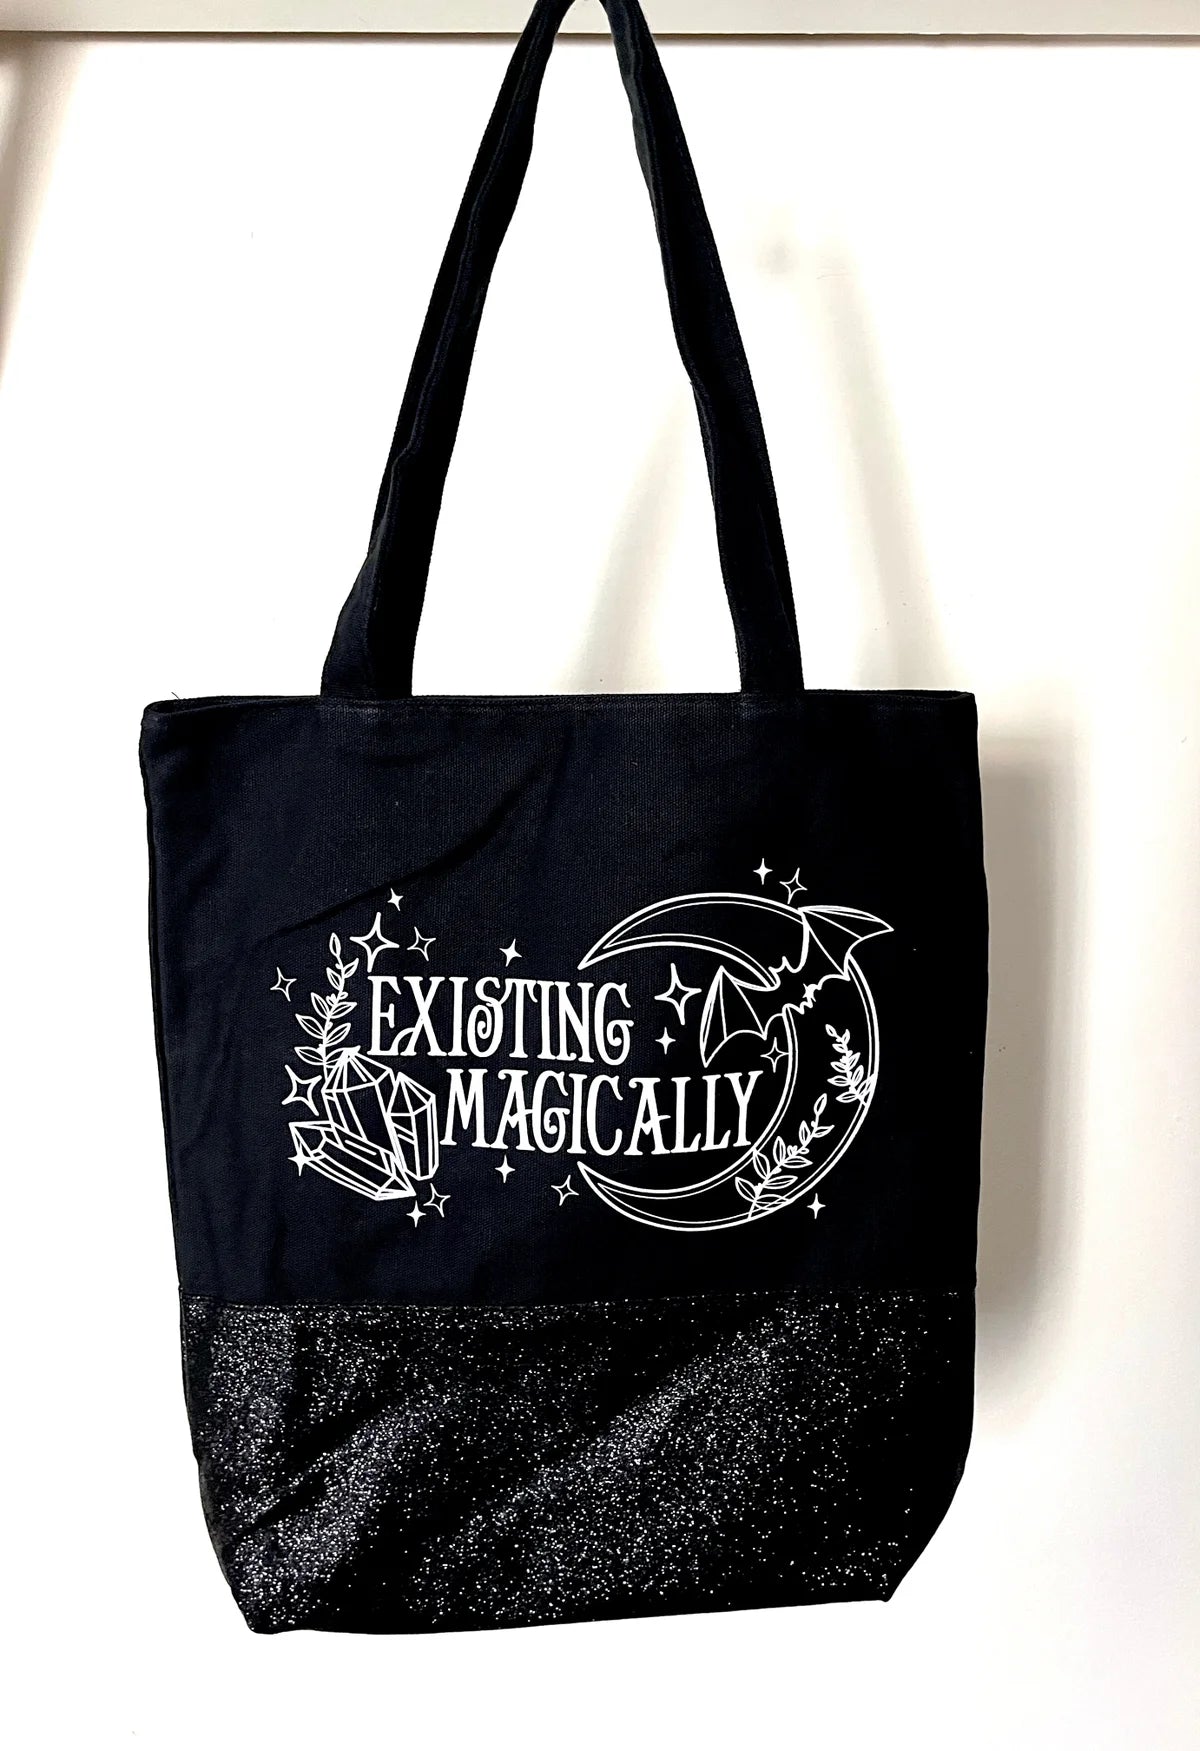 "Existing Magically" Tote Bag